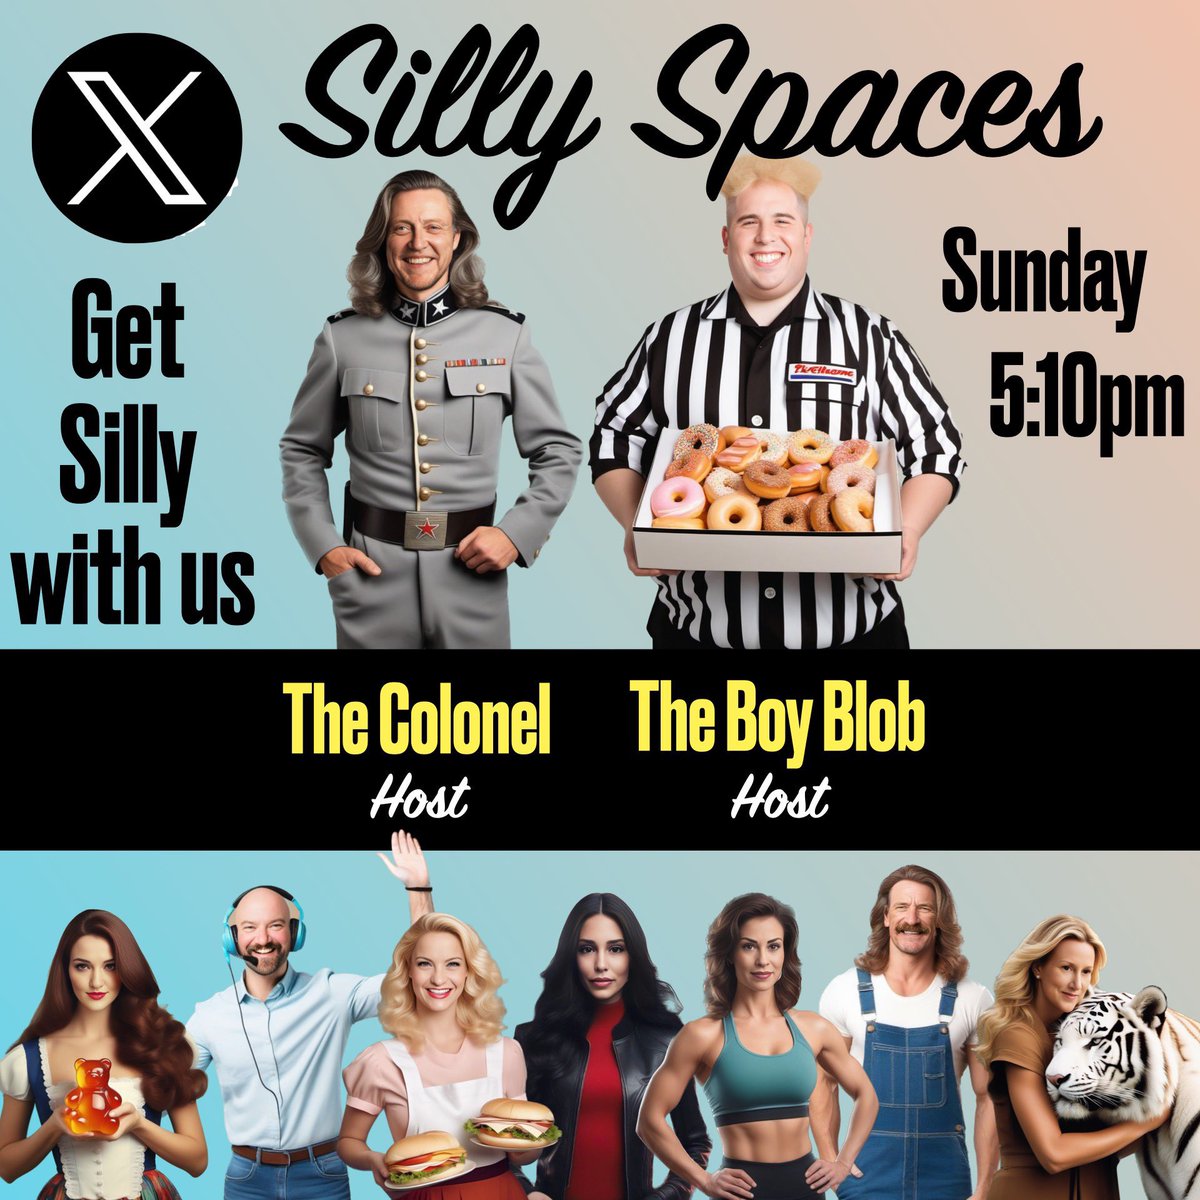 Coming up later today. Join us as we start the snowmageddon. 

We’ve become the warmup act for the real Spaces Stars: Silly Sundays with @TheBoyBlob and @ColonelAngus_PP who comes on right after us.   #SpaceSunday #Spaces #ScuttlebuttSunday